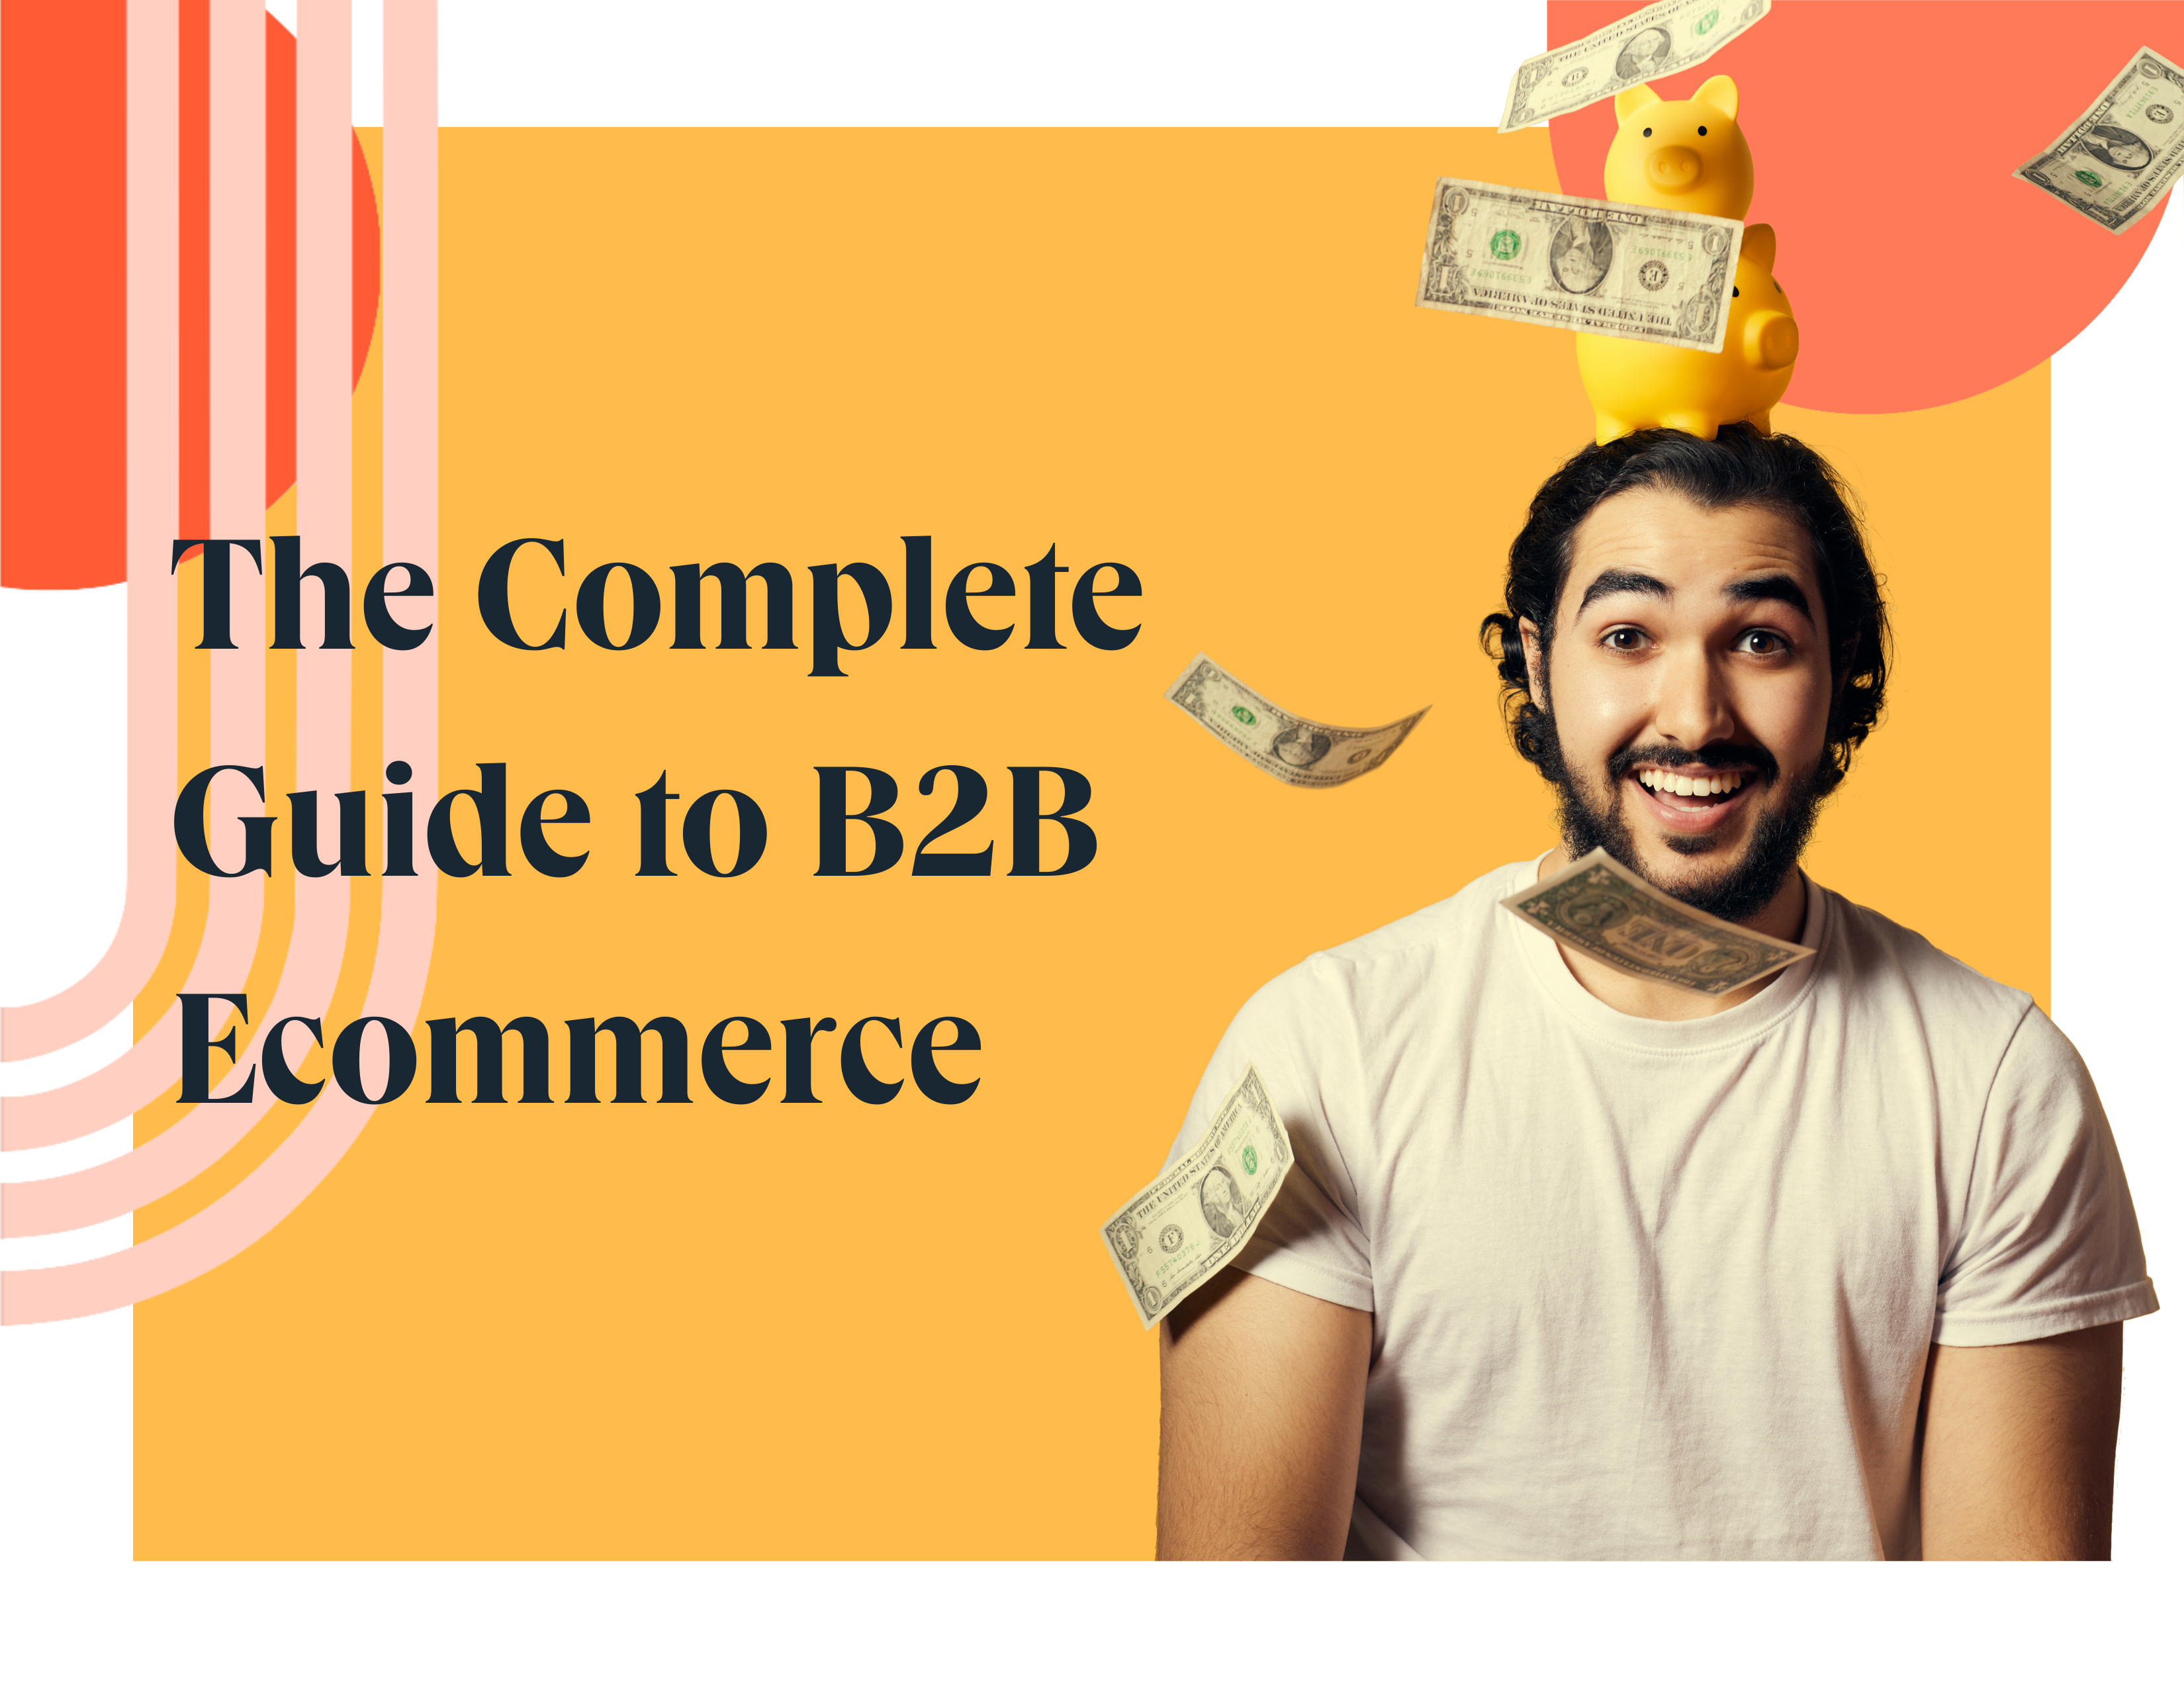 The Complete Guide to B2B Ecommerce